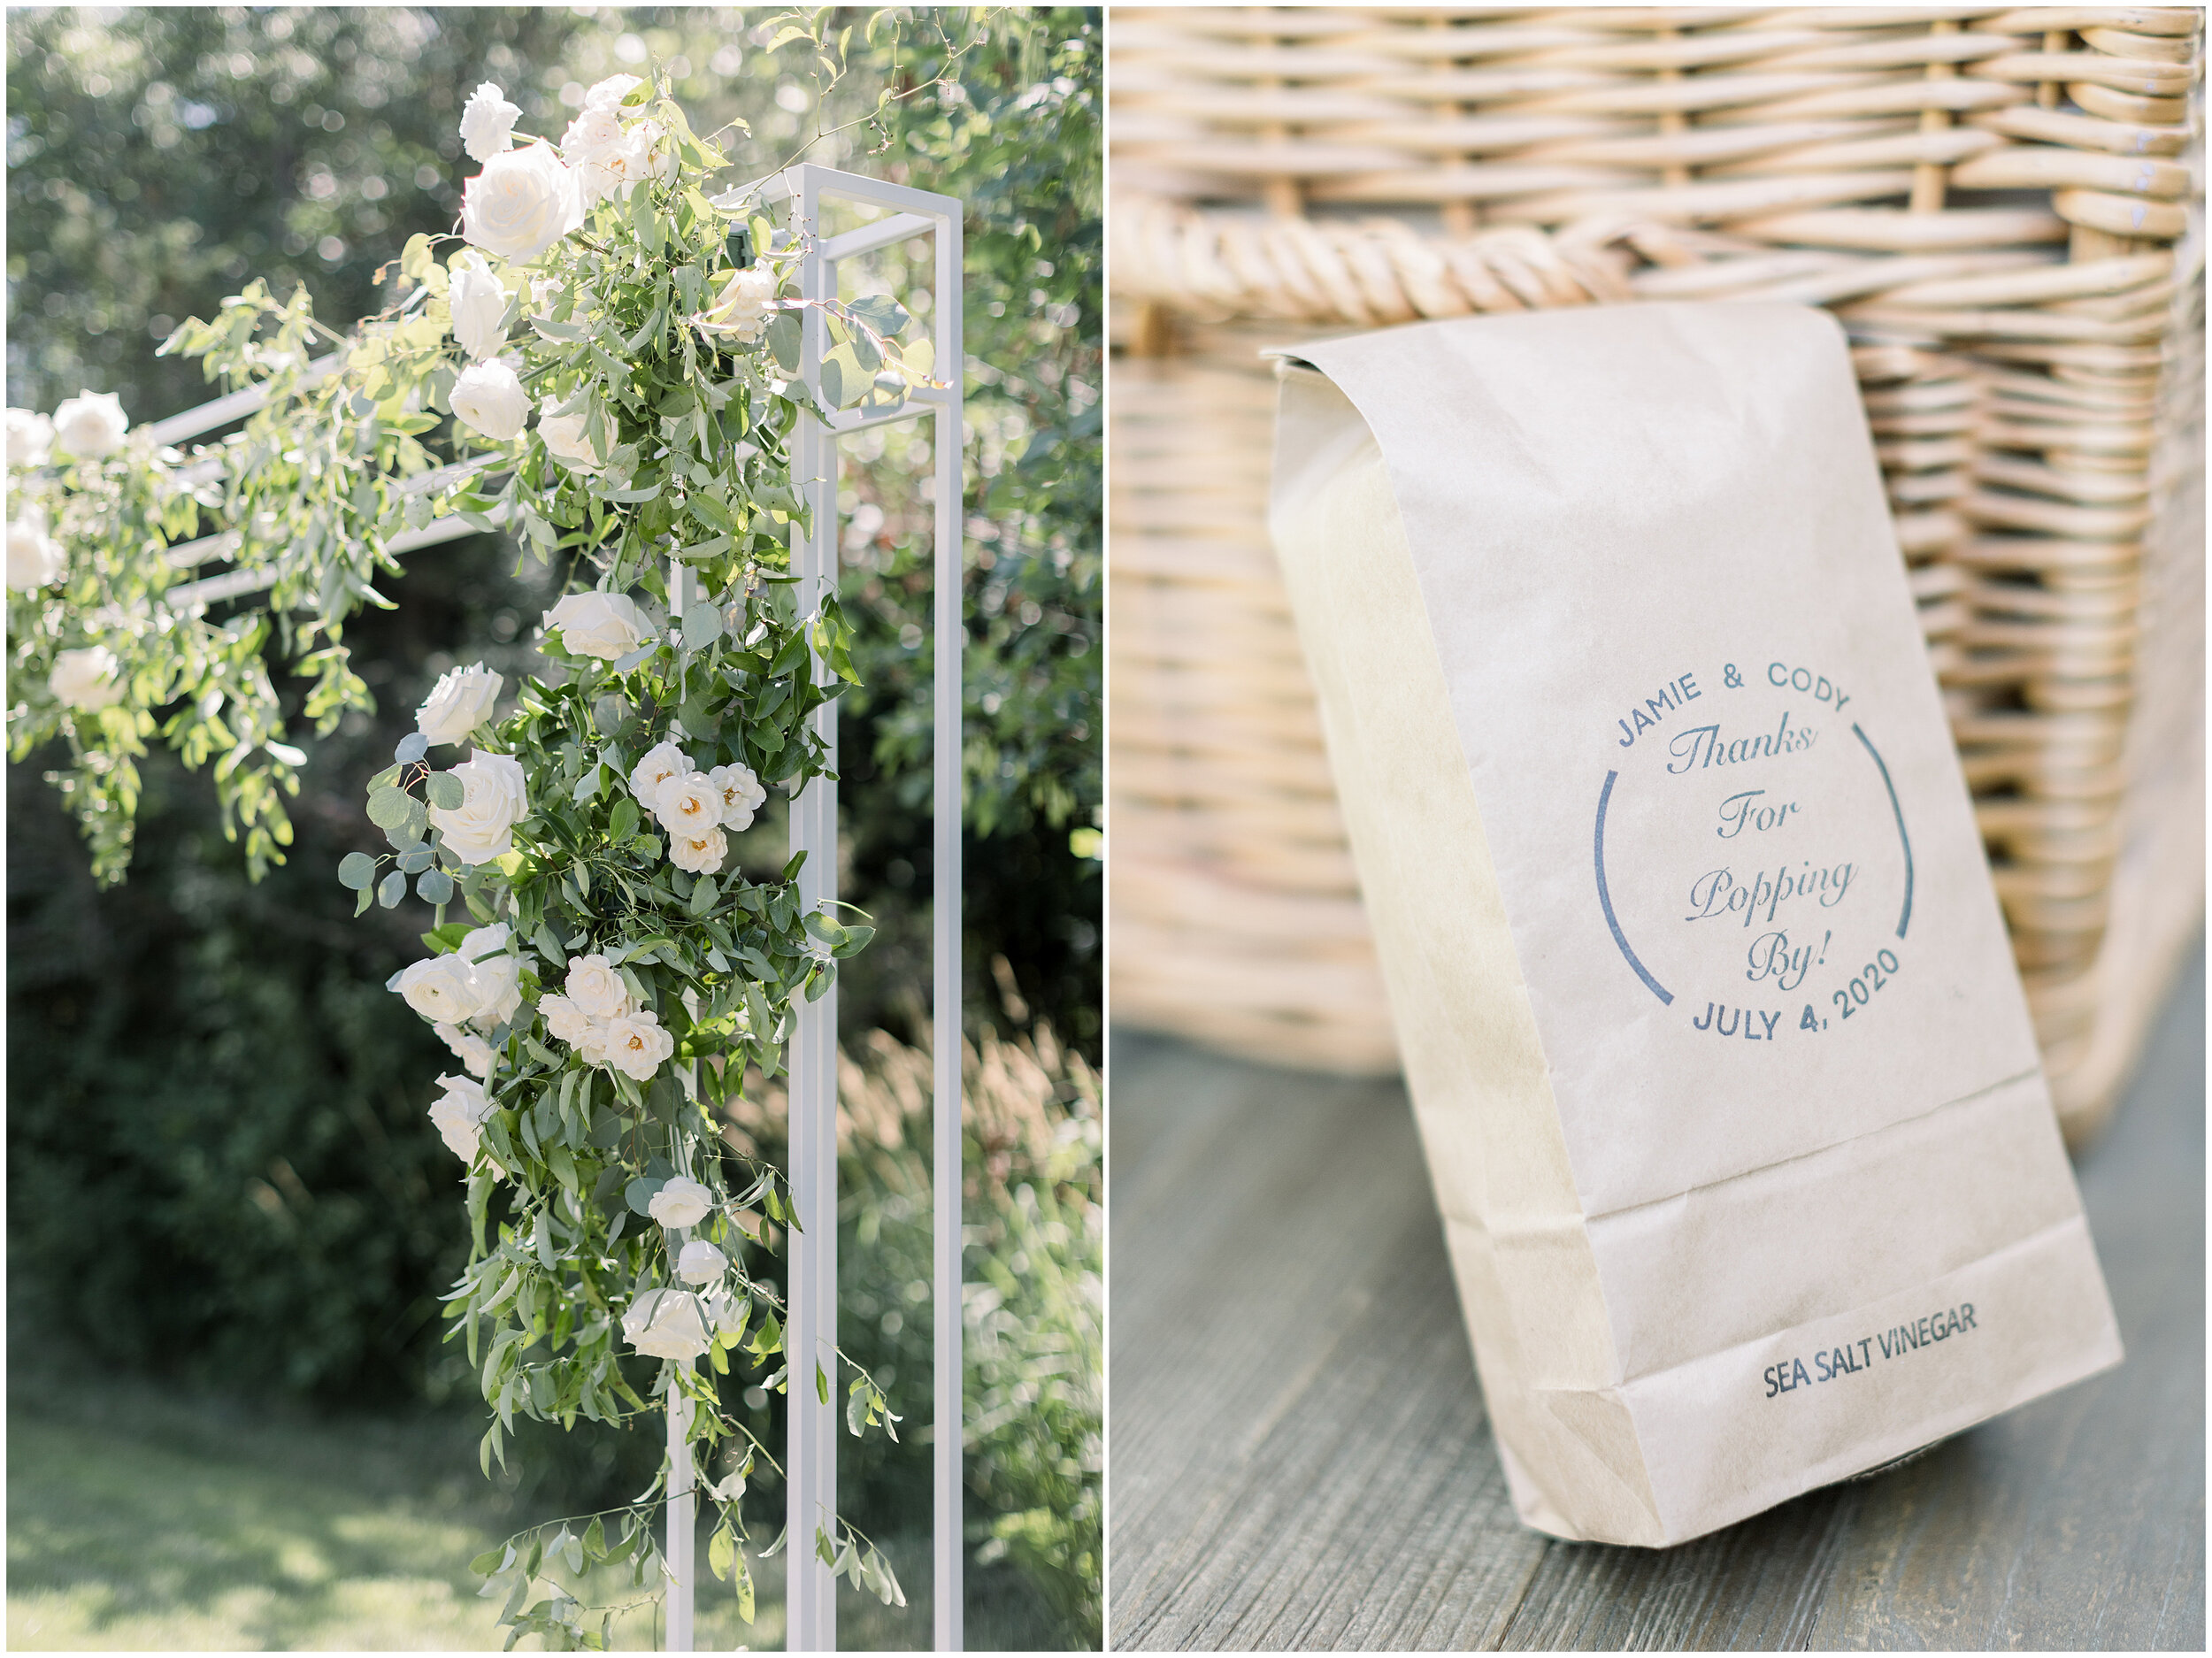  Thanks for popping by popcorn wedding party favor bag for boho outdoor backyard wedding in Ottawa, ON by Chelsea Morgan Photography. outdoor backyard wedding seat decor inspo wedding seat decor ideas wedding party favor ideas simple wedding party fa